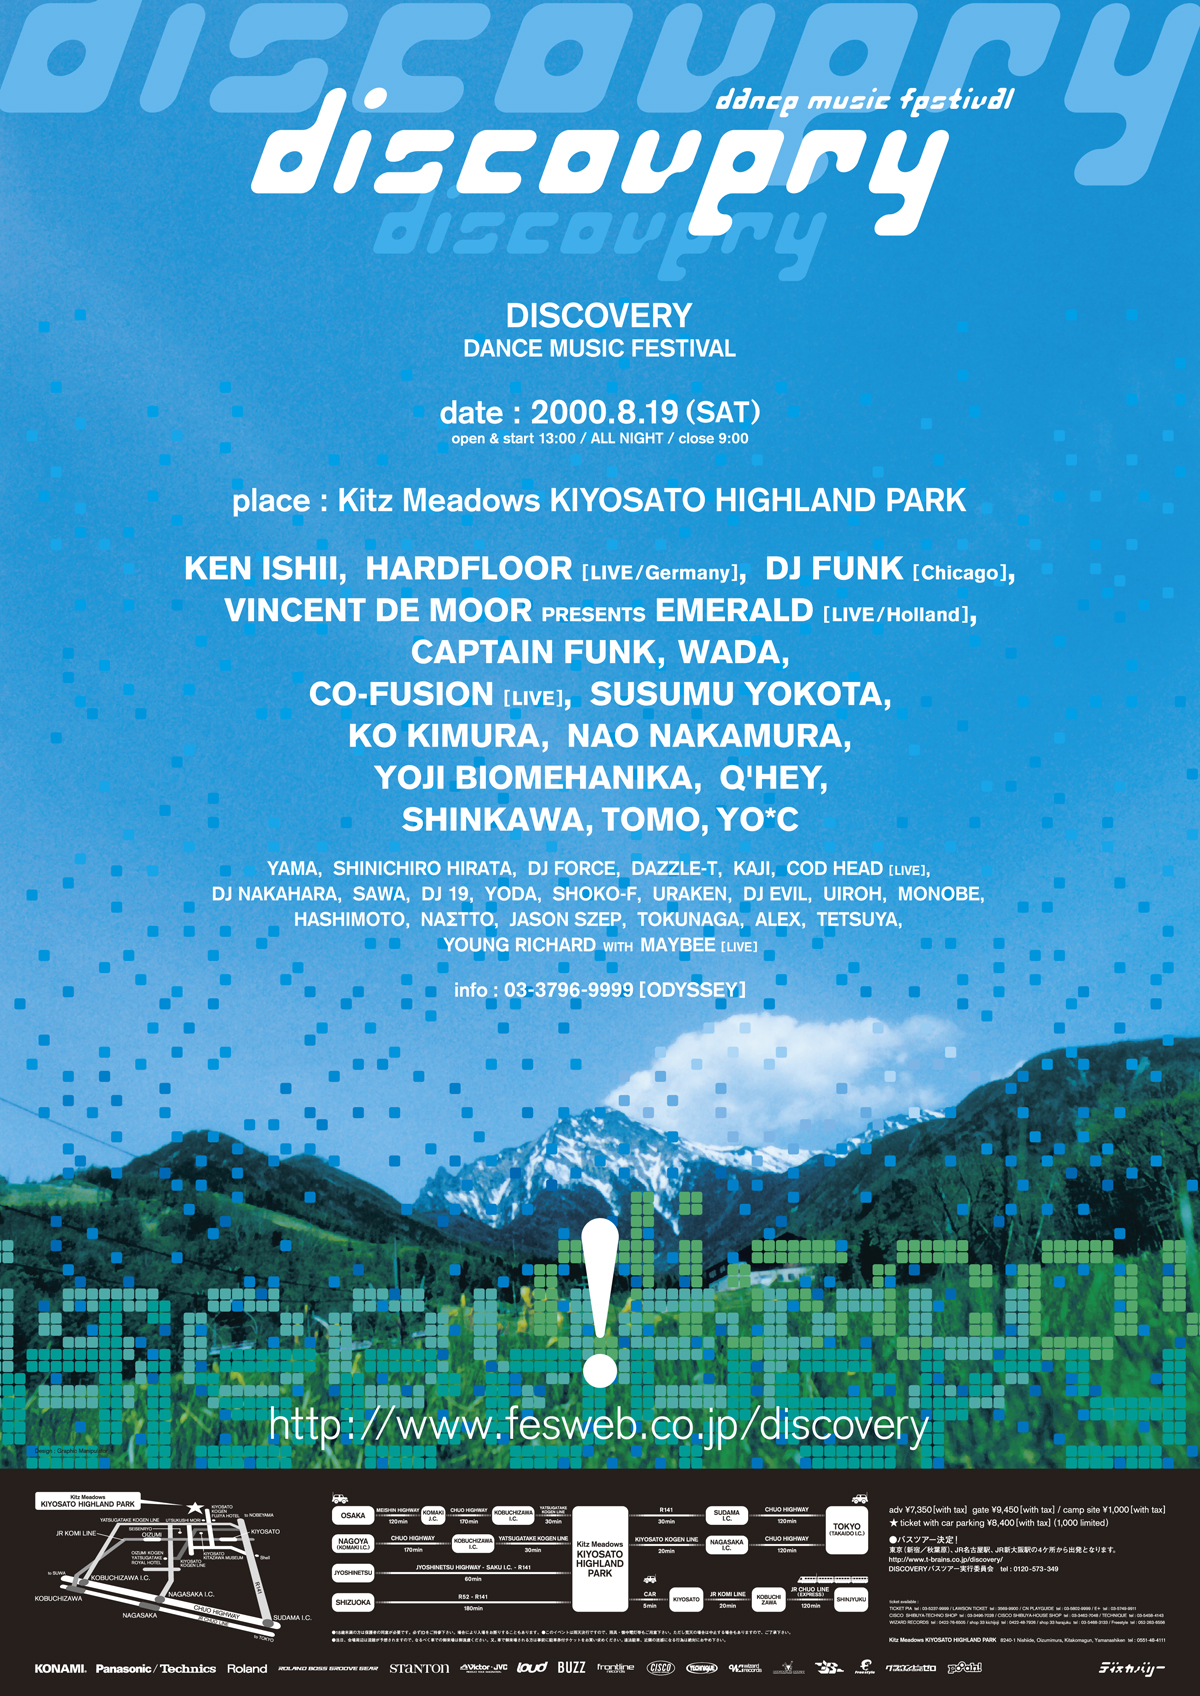 Dance Music festival “discovery”